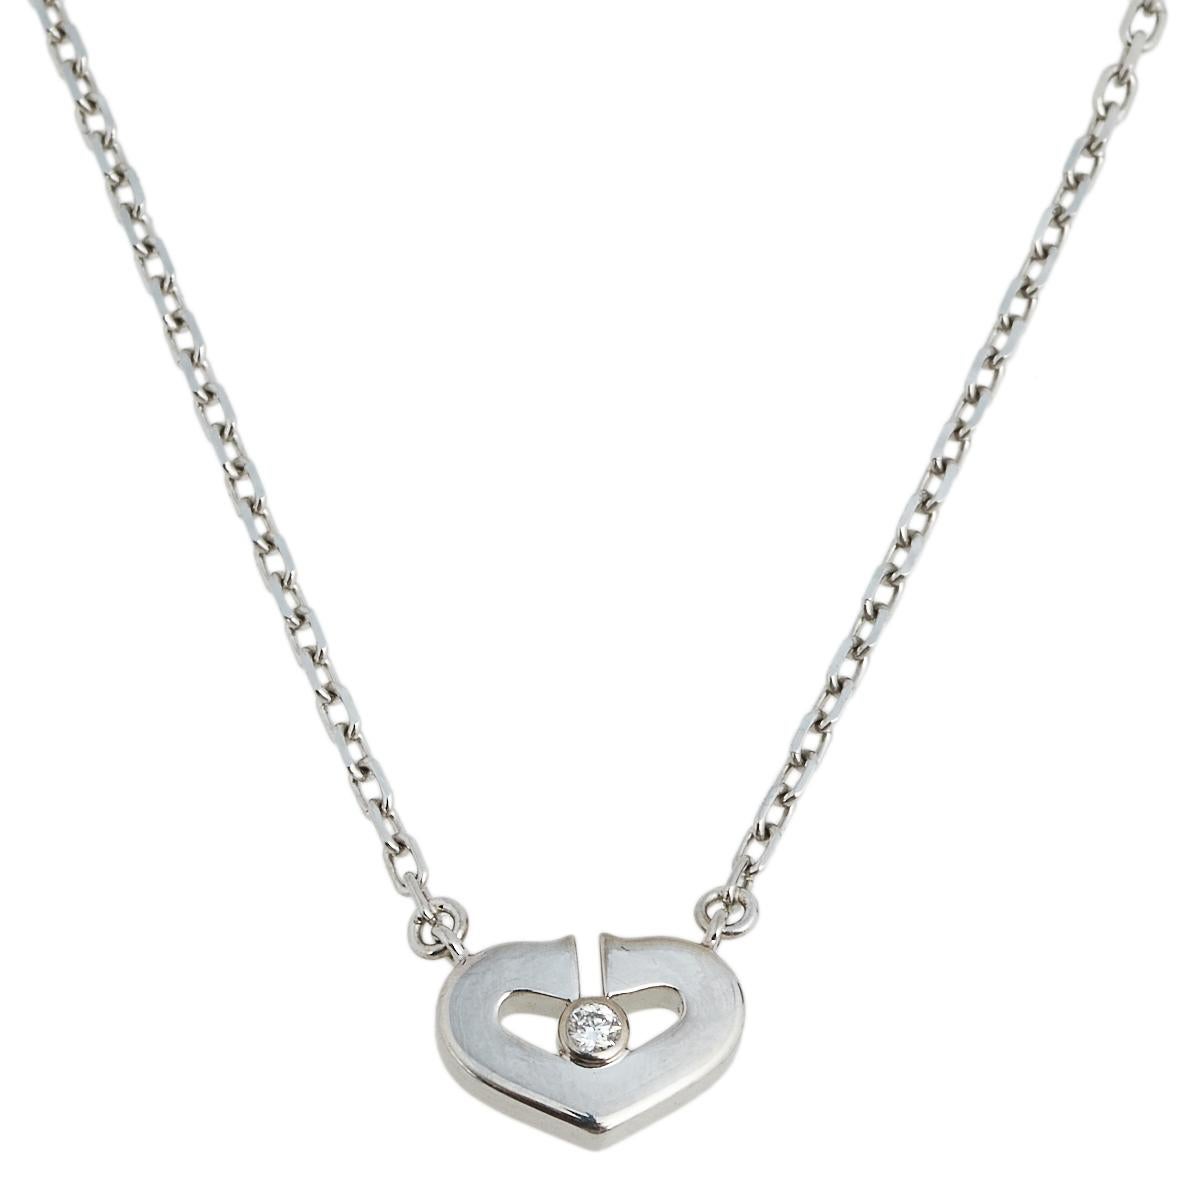 Looking for the perfect jewelry design that represents true love? Go for this stunning Cartier Heart C necklace. Fashioned in 18K white gold, this alluring piece features a C-heart that opens at the top and is adorned with a dazzling diamond at the